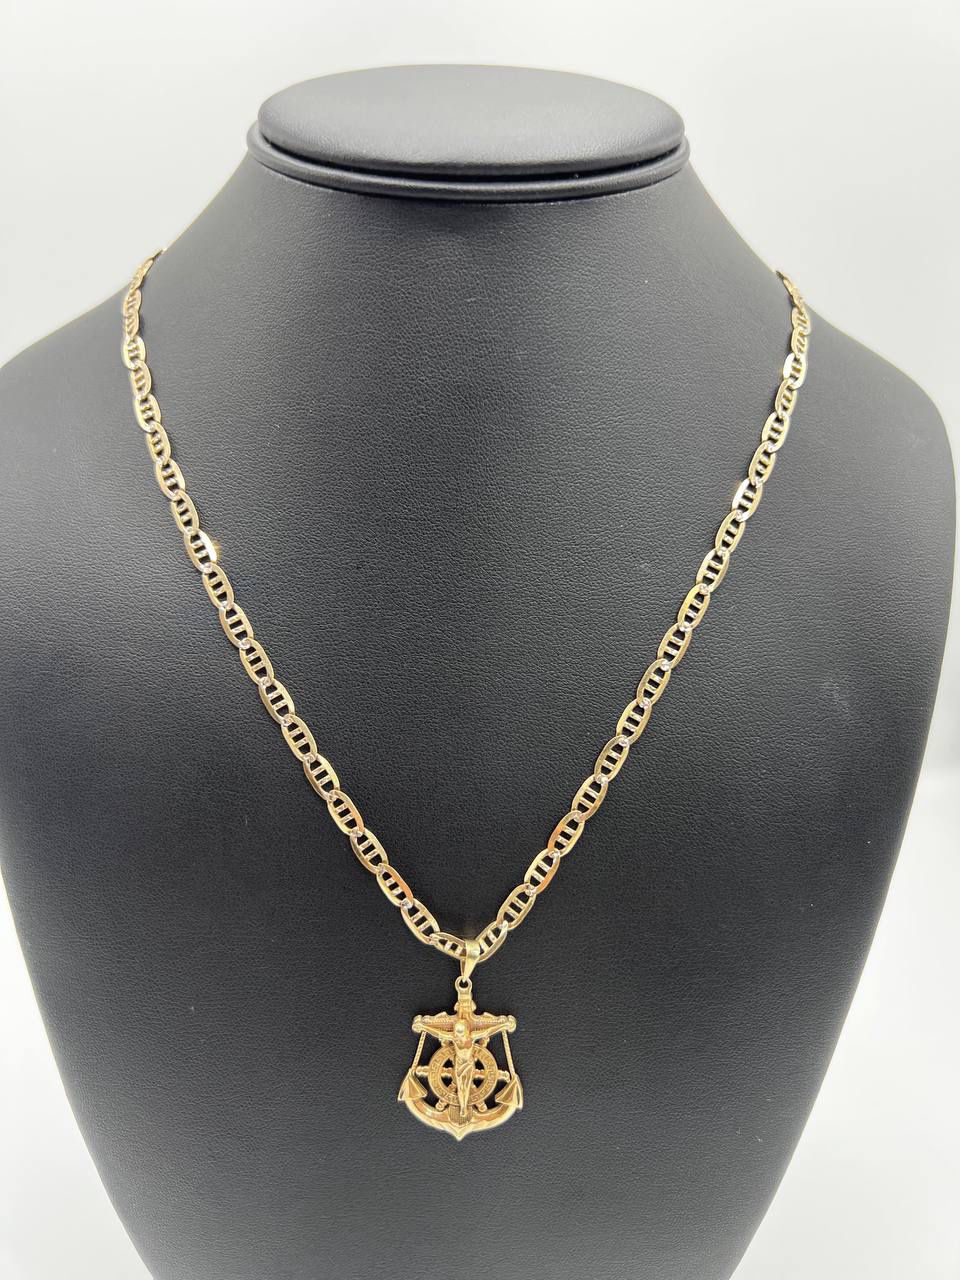 10k solid gold Mariner necklace chain with Jesus on anchor pendant made of 10k solid gold